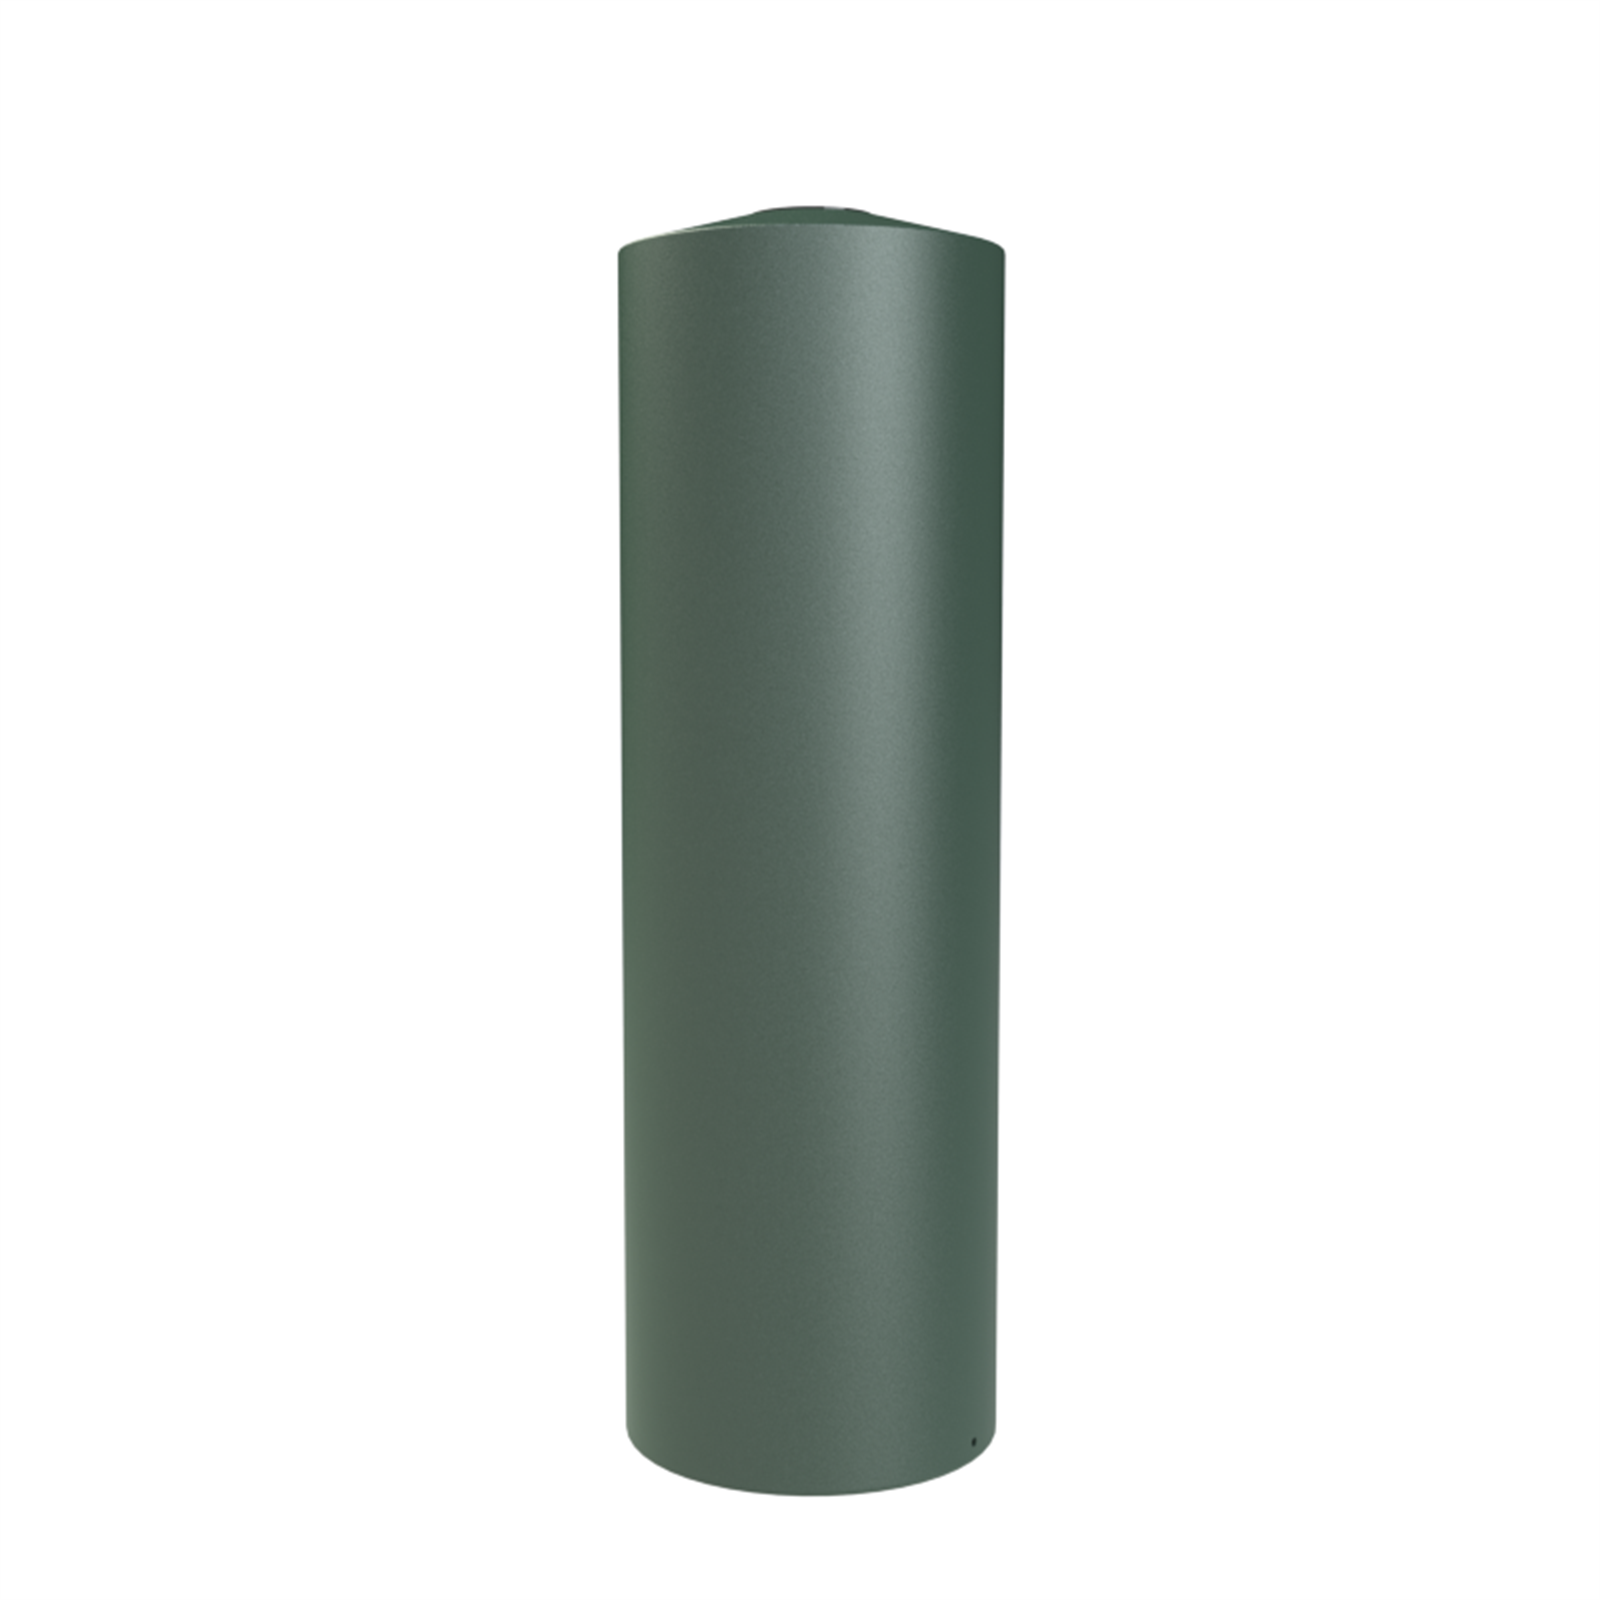 Melro 4500L Tall Round Poly Water Tank - Heritage Green